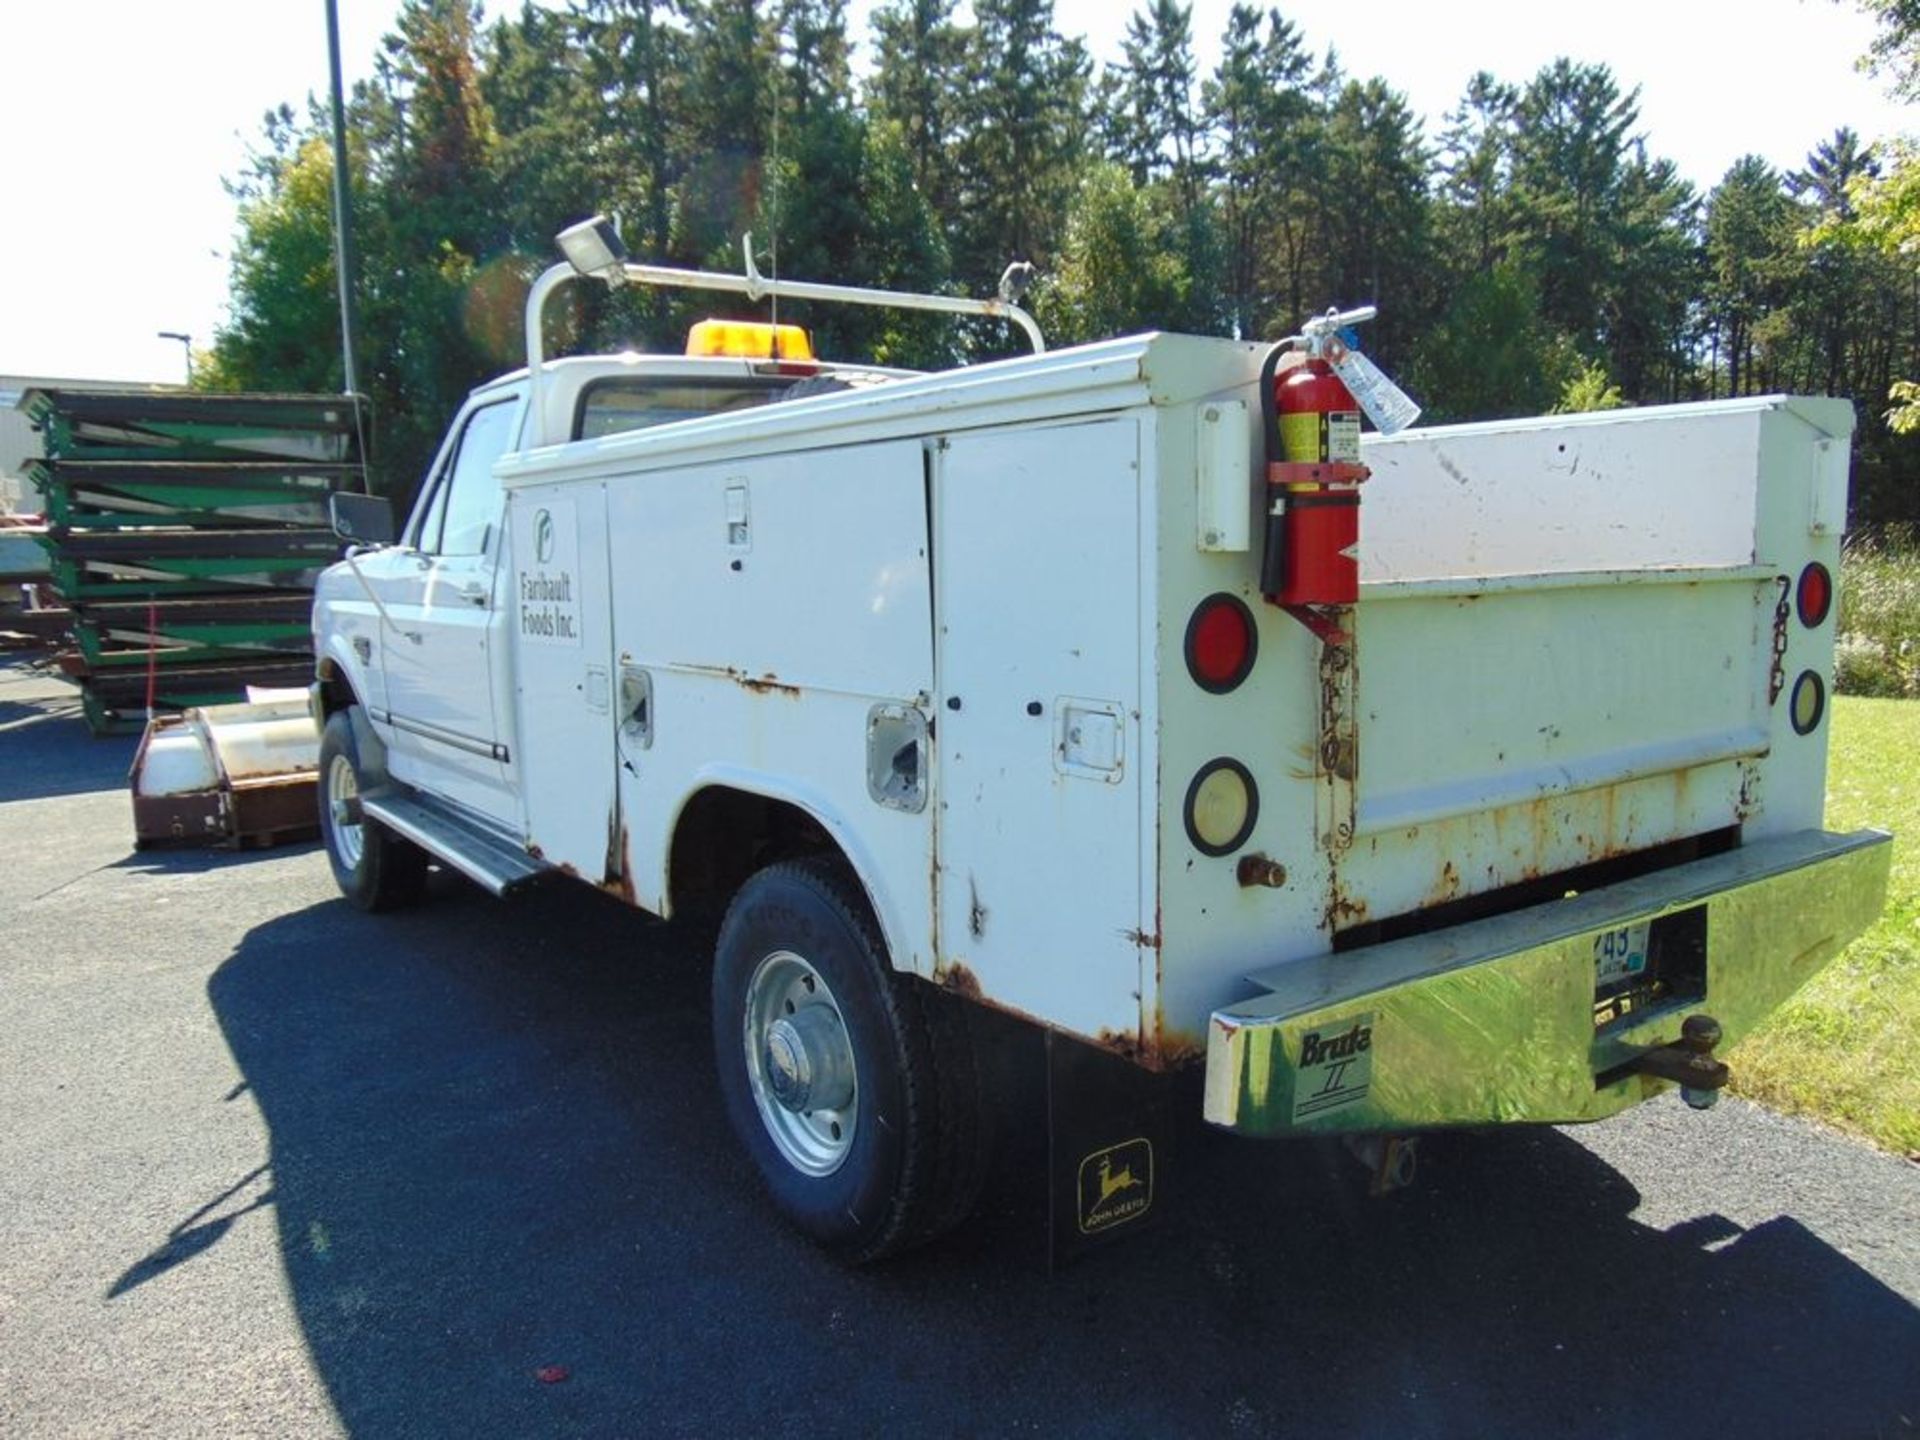 (1997) Ford mod.. F-350XLT Utility Truck w/ Plow 4x4, Miles: 98,792; Lic: E1243; - Image 2 of 5